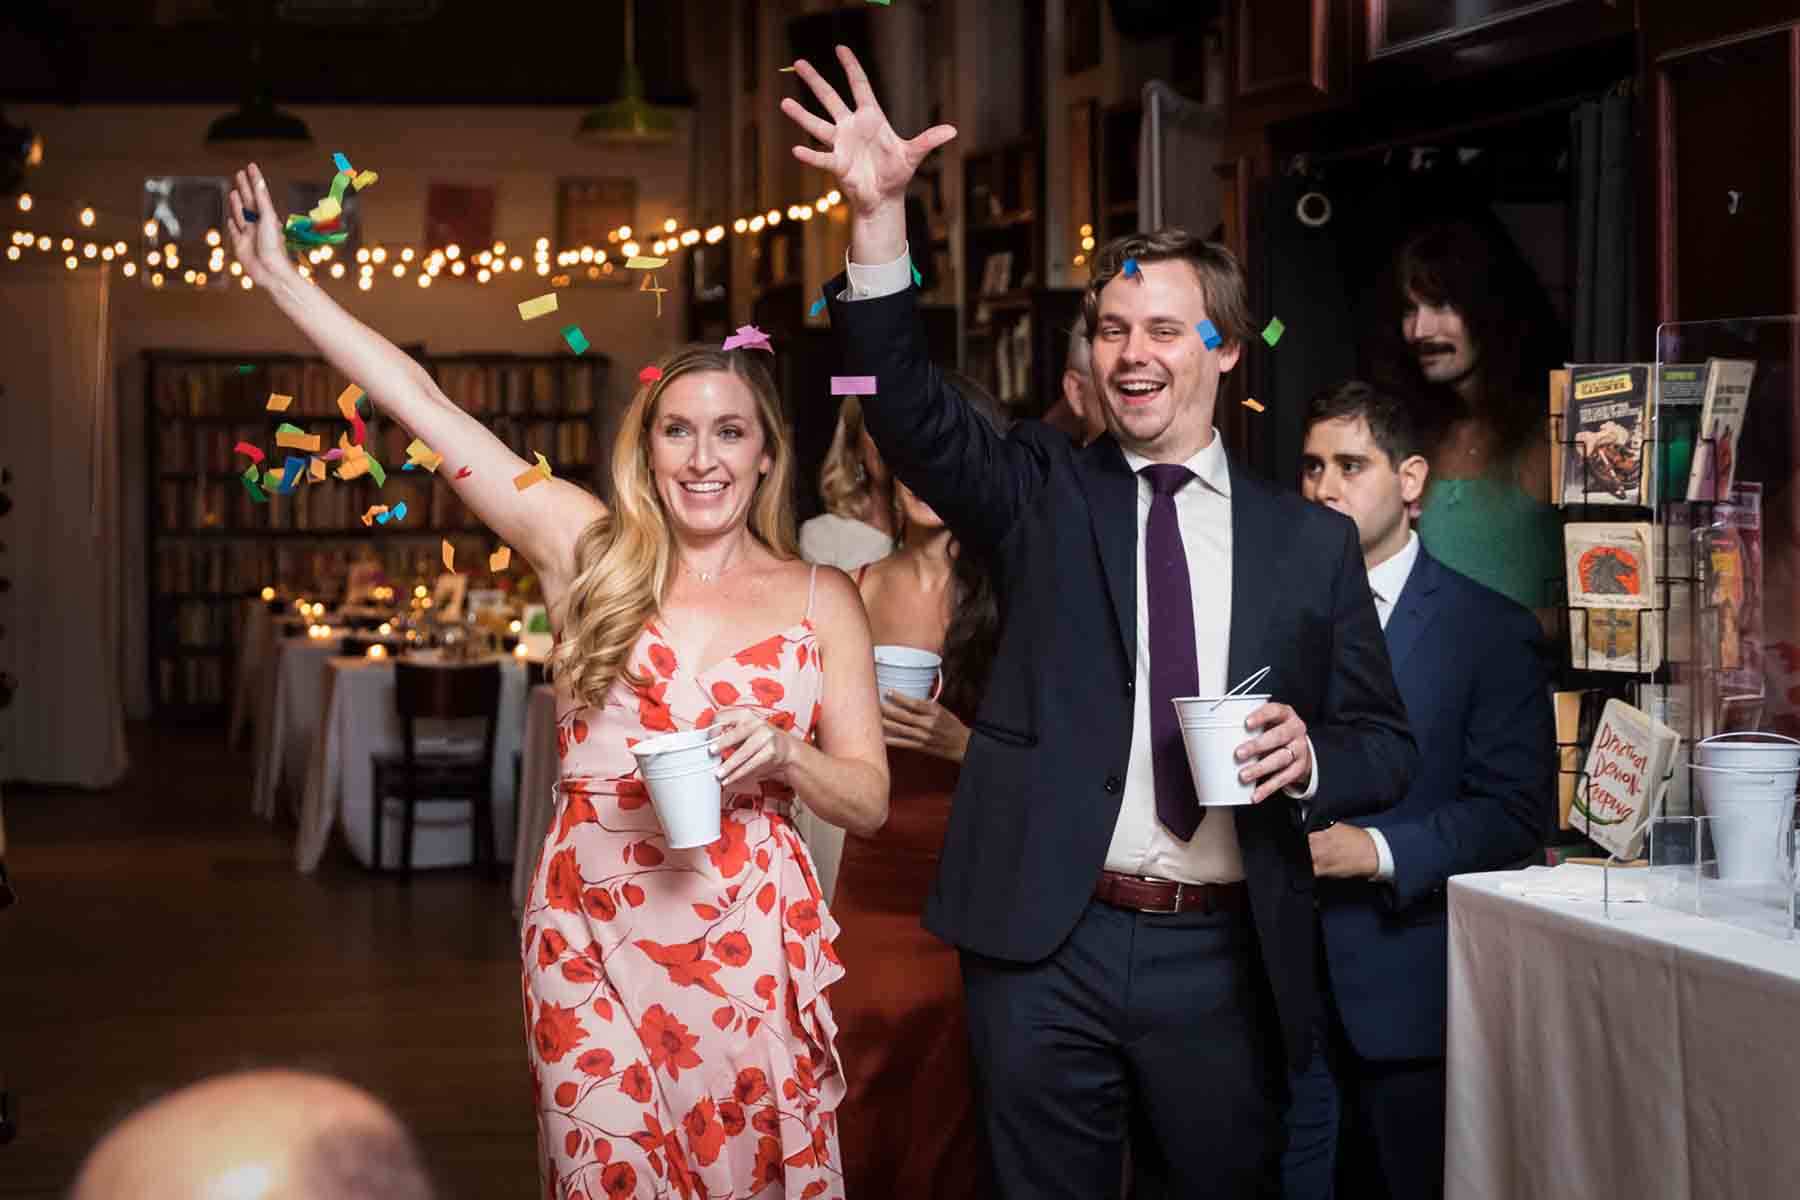 Guests enthusiastically throwing confetti during a wedding for an article on the best wedding jobs for family and friends